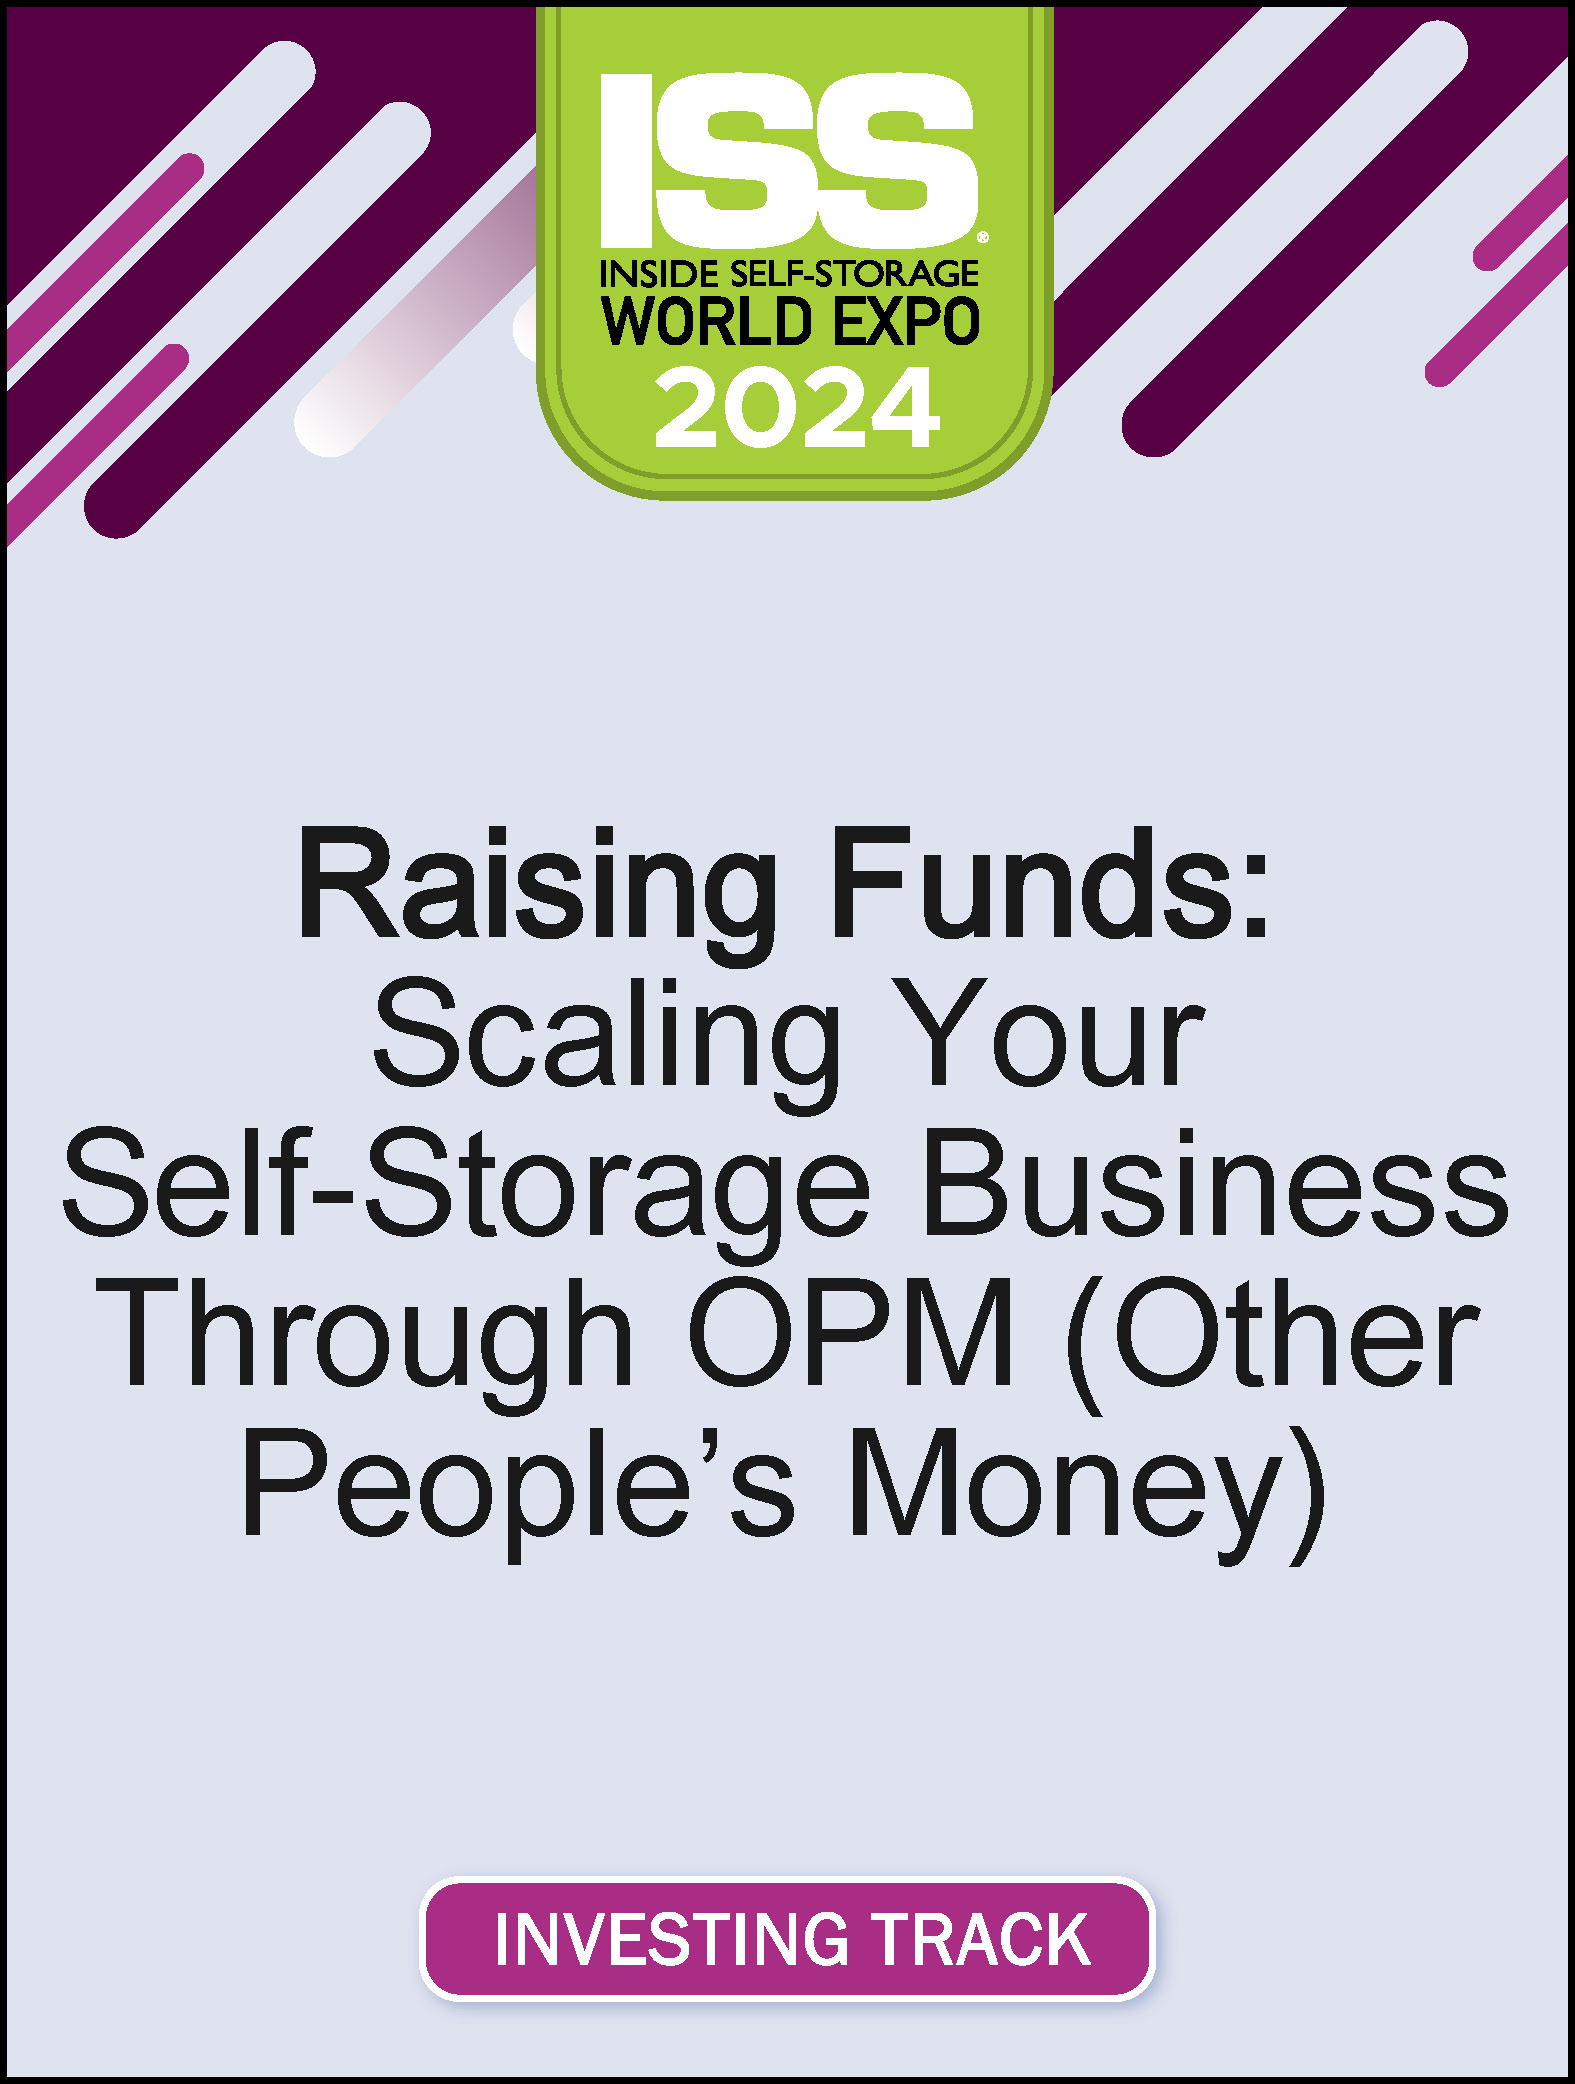 Video Pre-Order - Raising Funds: Scaling Your Self-Storage Business Through OPM (Other People’s Money)